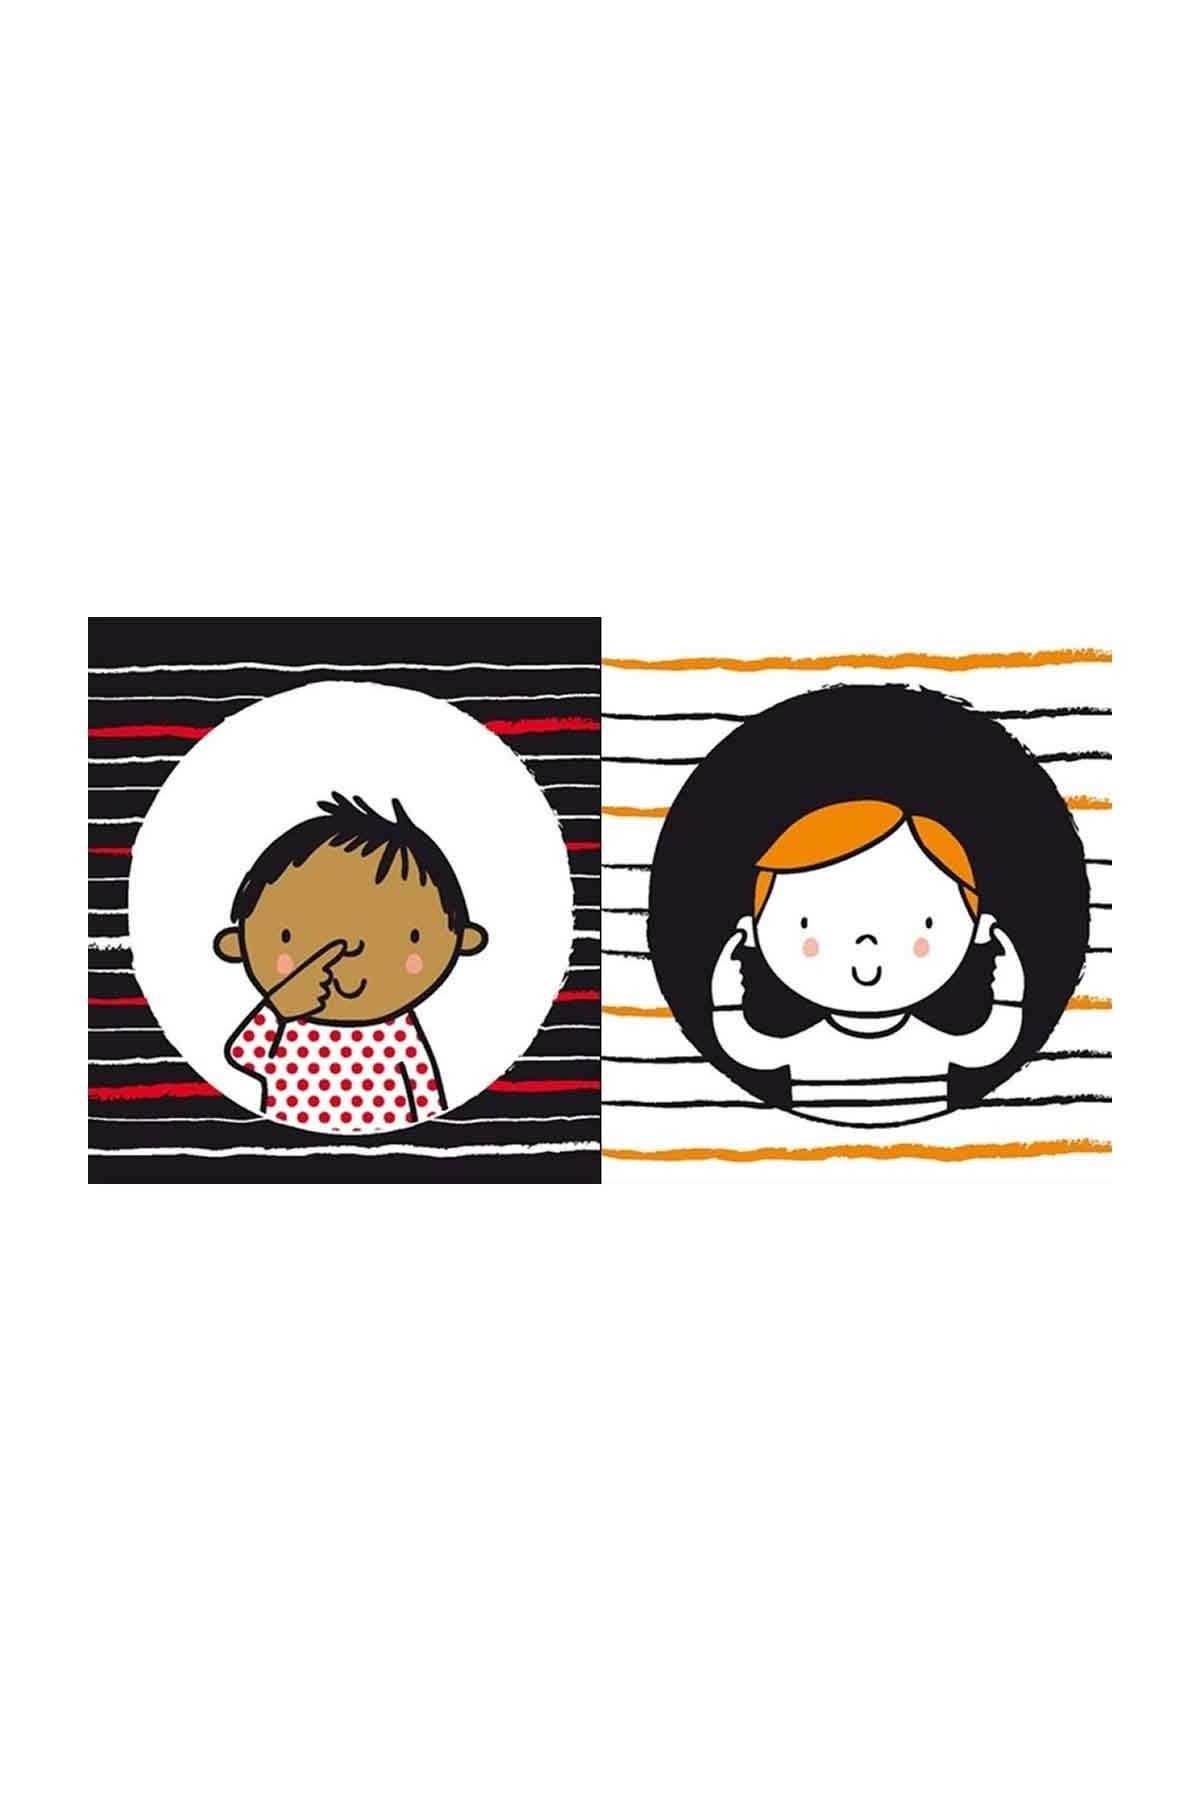 The Usborne Baby's Very First Black And White Book Faces